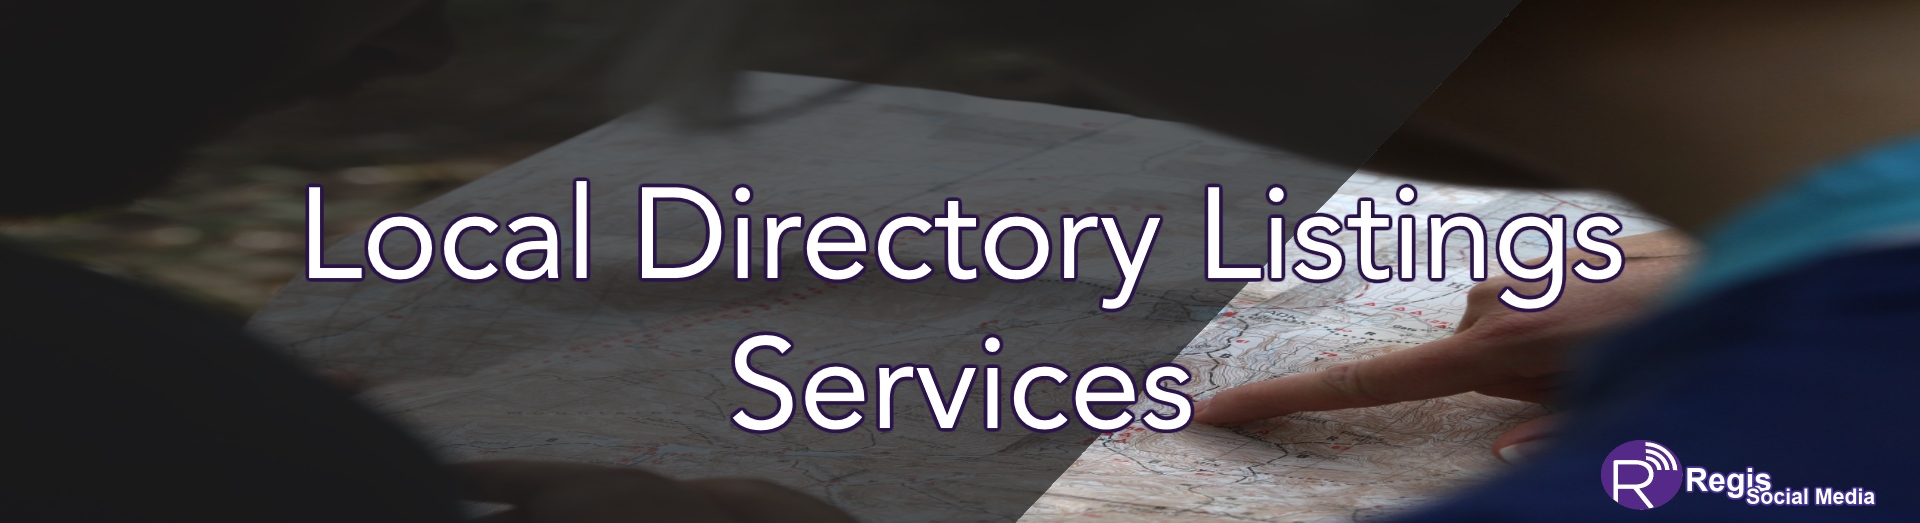 local listing directory services banner